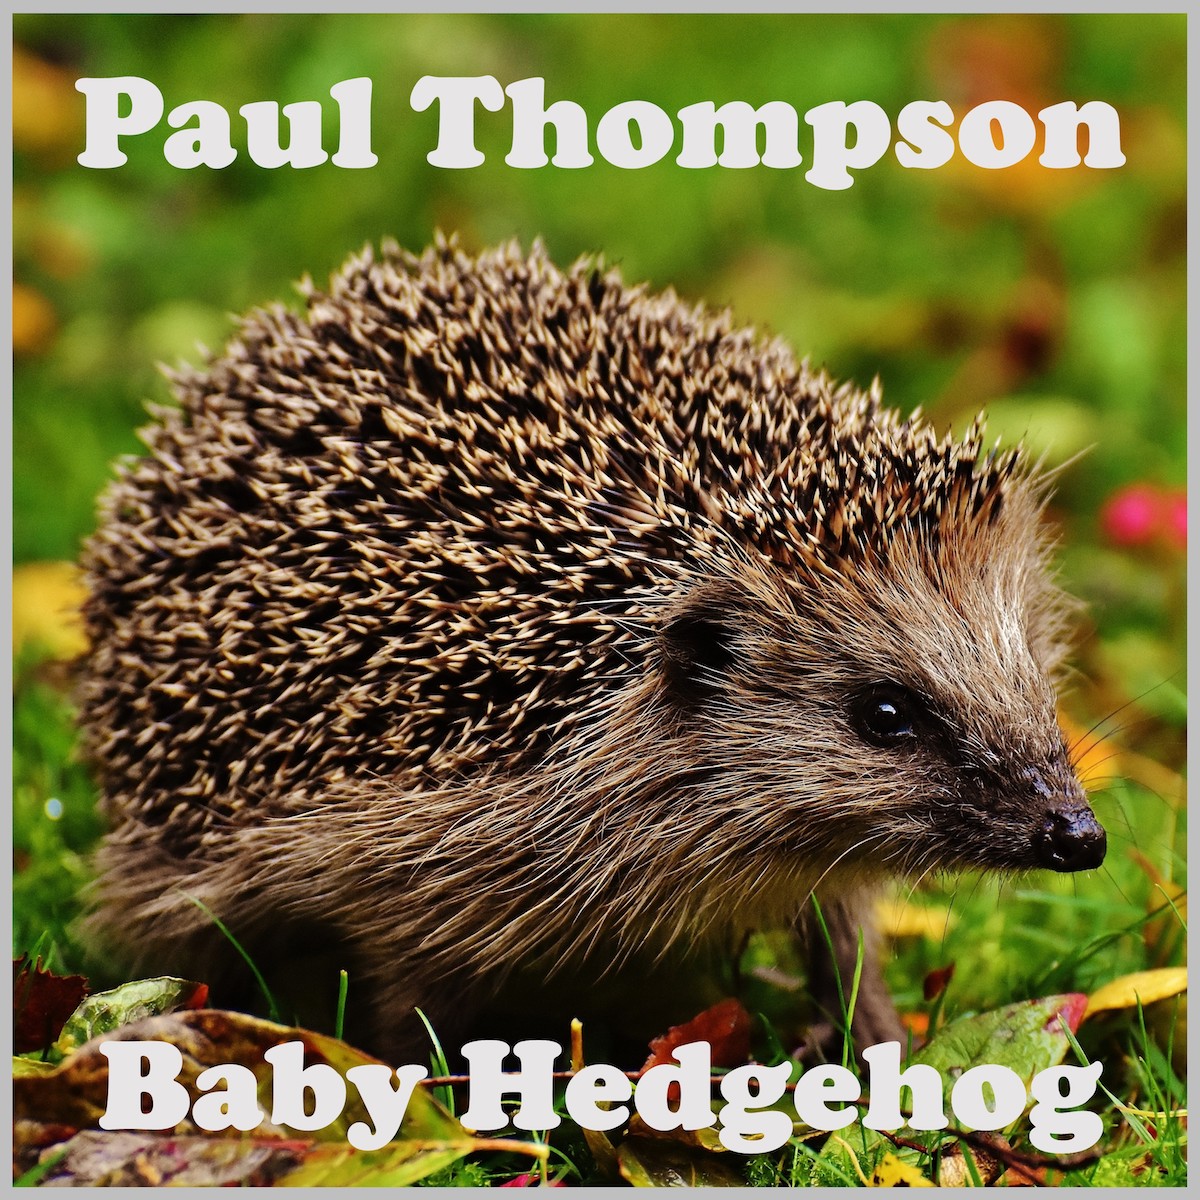 ALBUM REVIEW: Baby Hedgehog by Paul Thompson